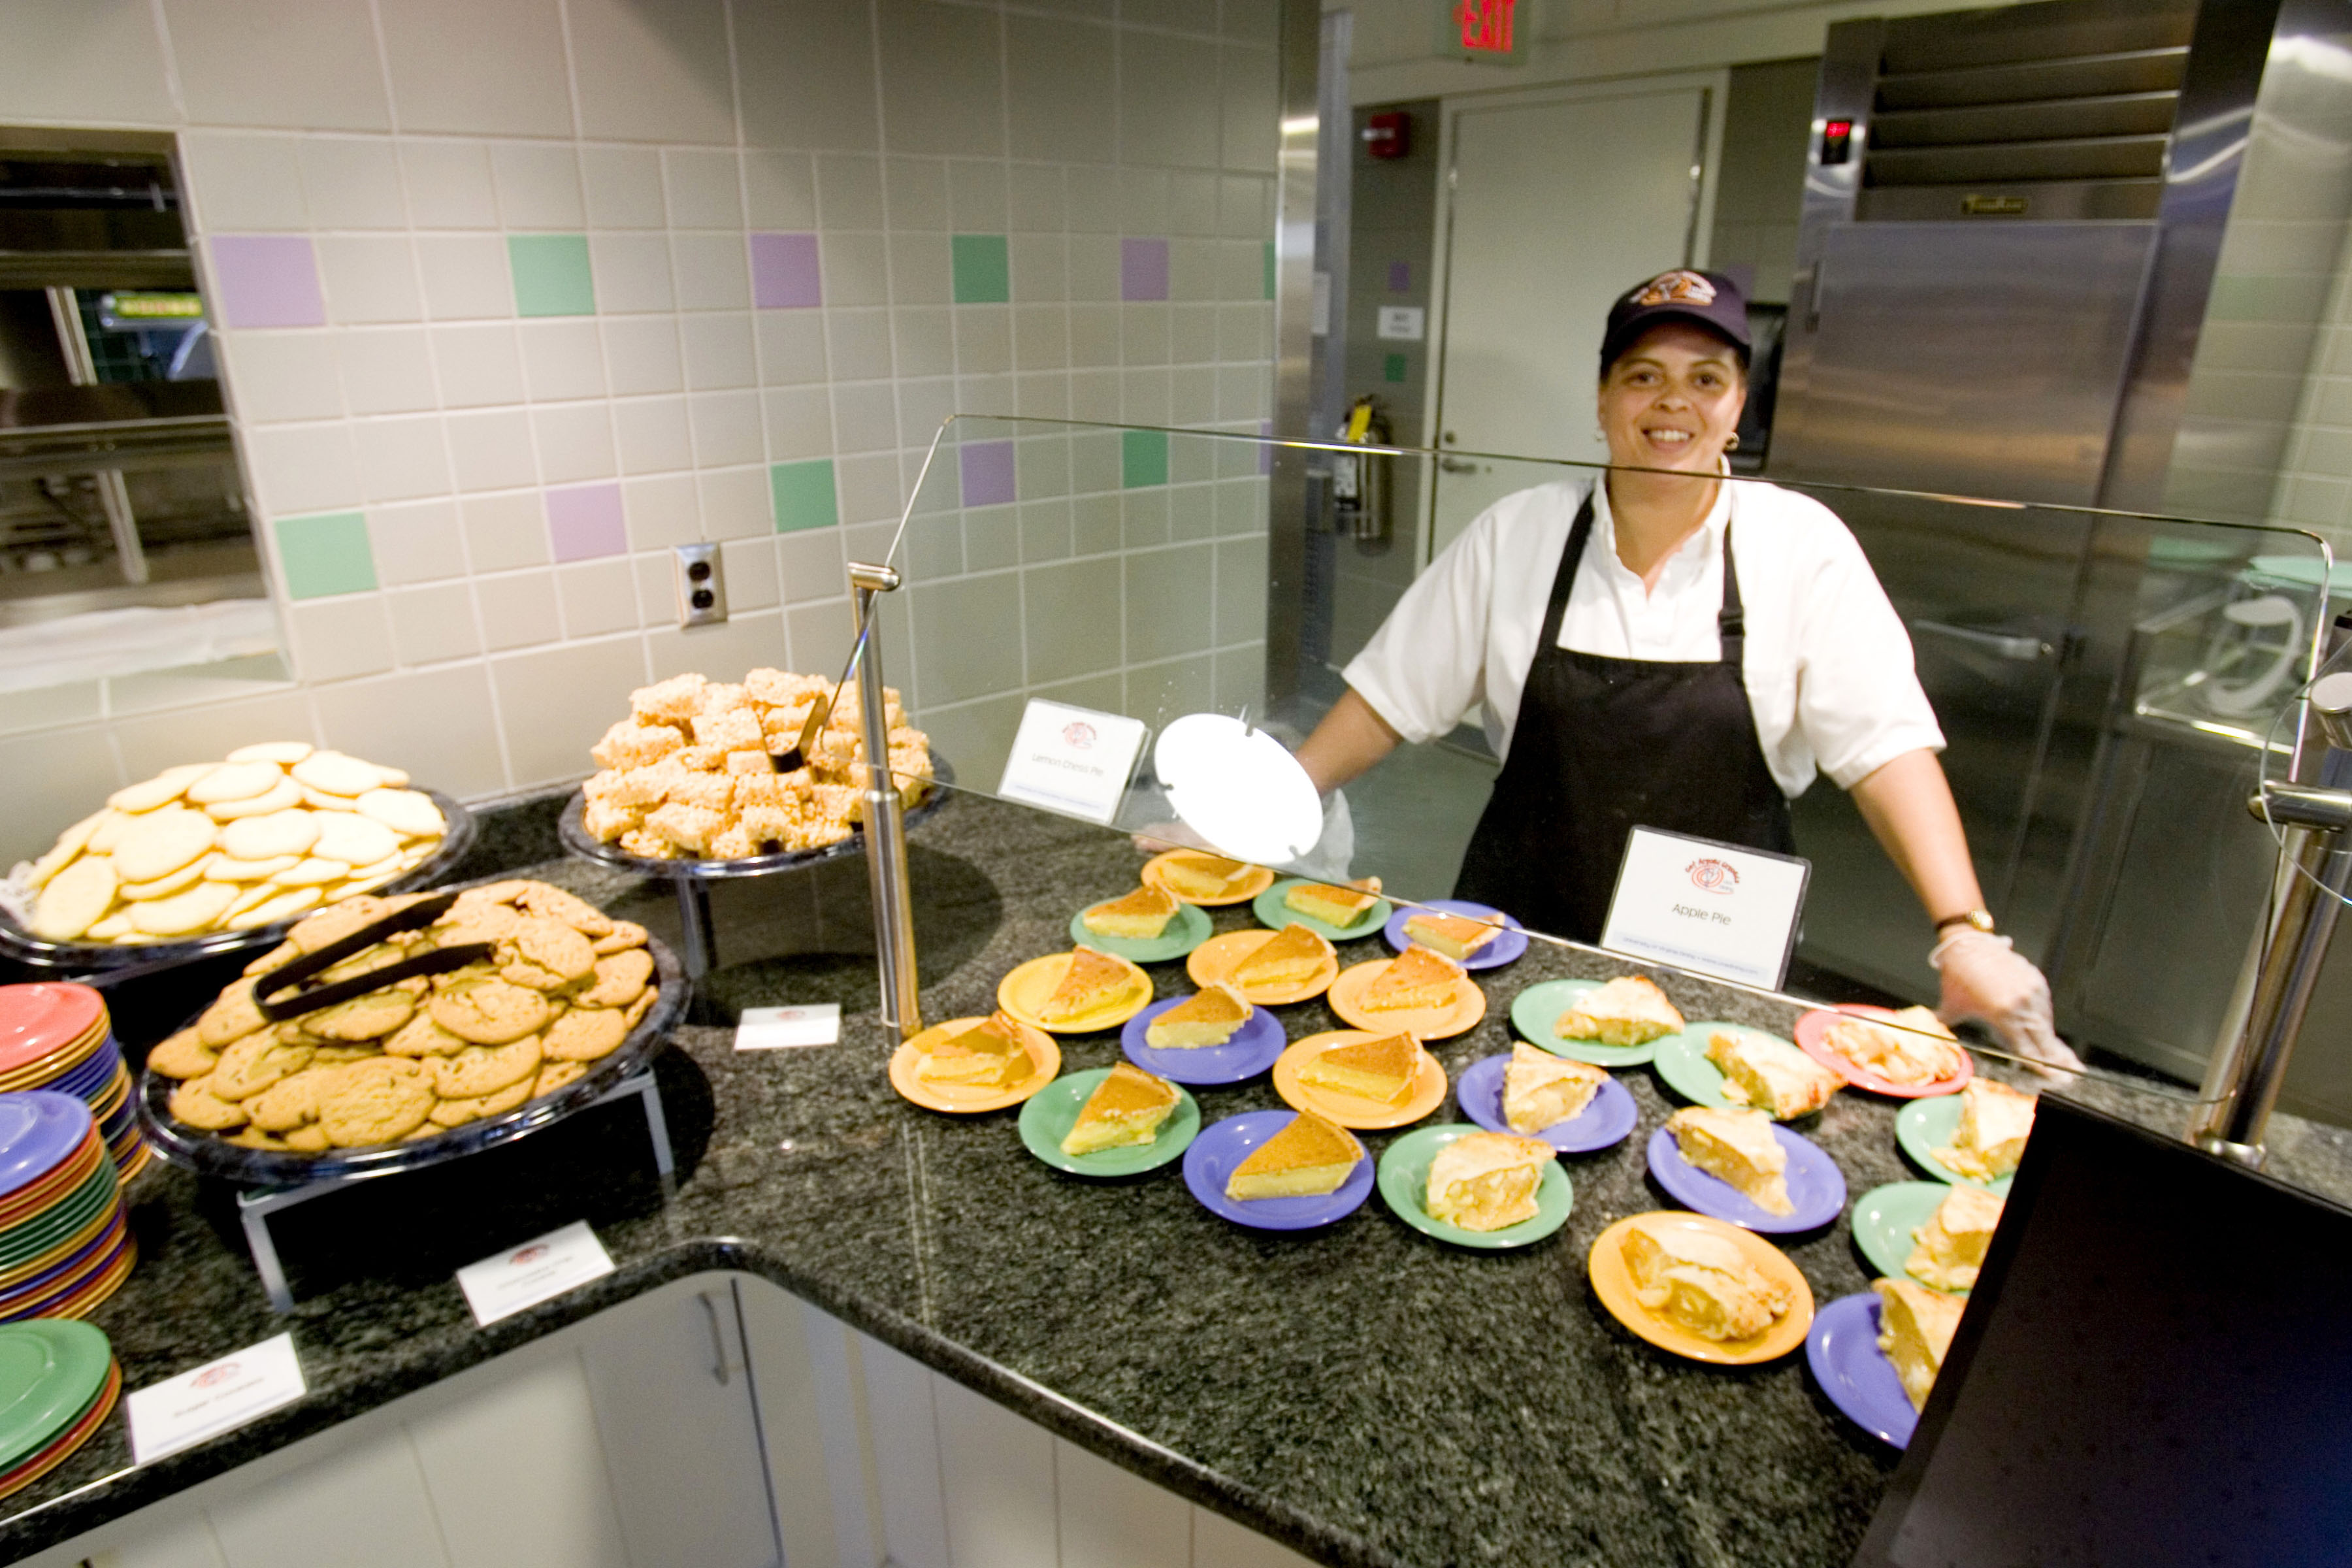 UVA chef stands behind deserts at a UVA dining hall station